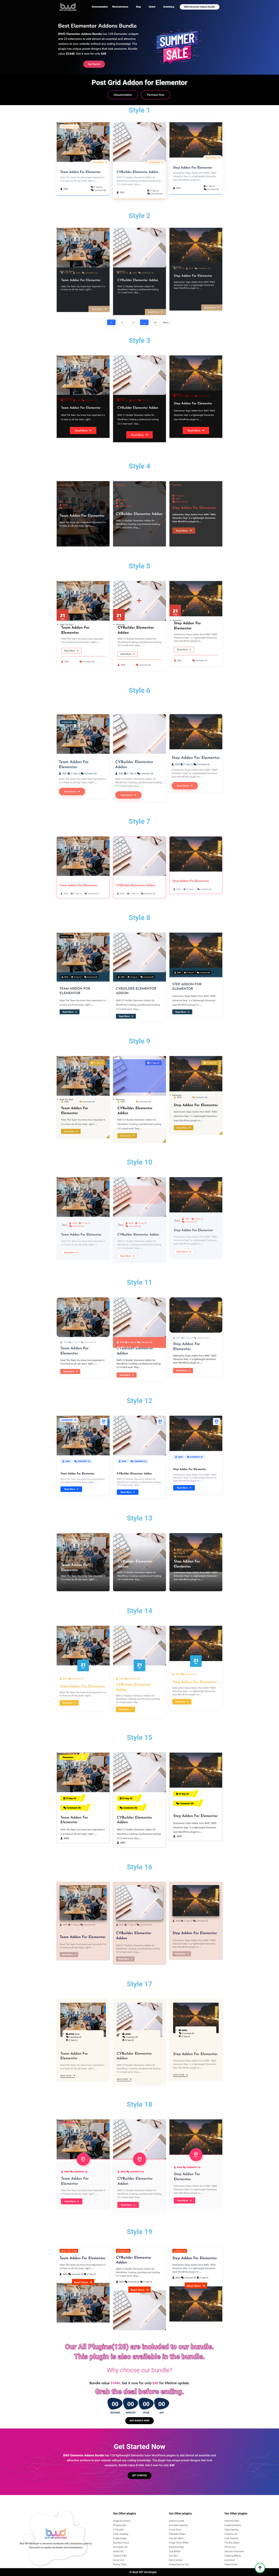 Here show some widgets for WooCommerce products /assets/screenshot-4.jpg